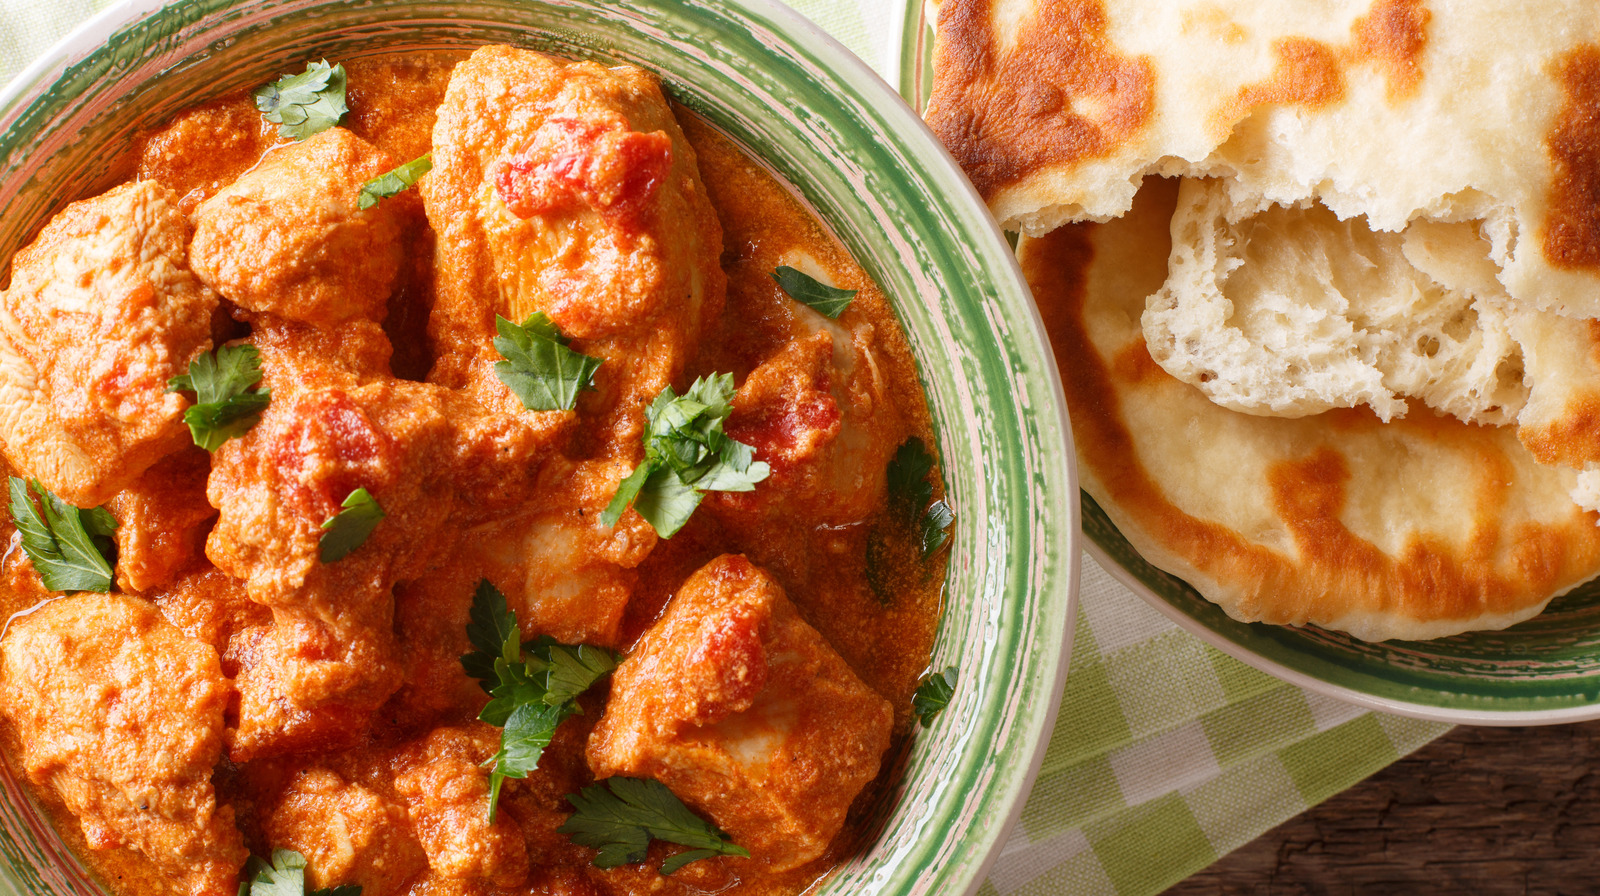 https://www.tastingtable.com/img/gallery/the-bold-flavors-that-make-pakistans-chicken-karahi-stand-out/l-intro-1673982244.jpg